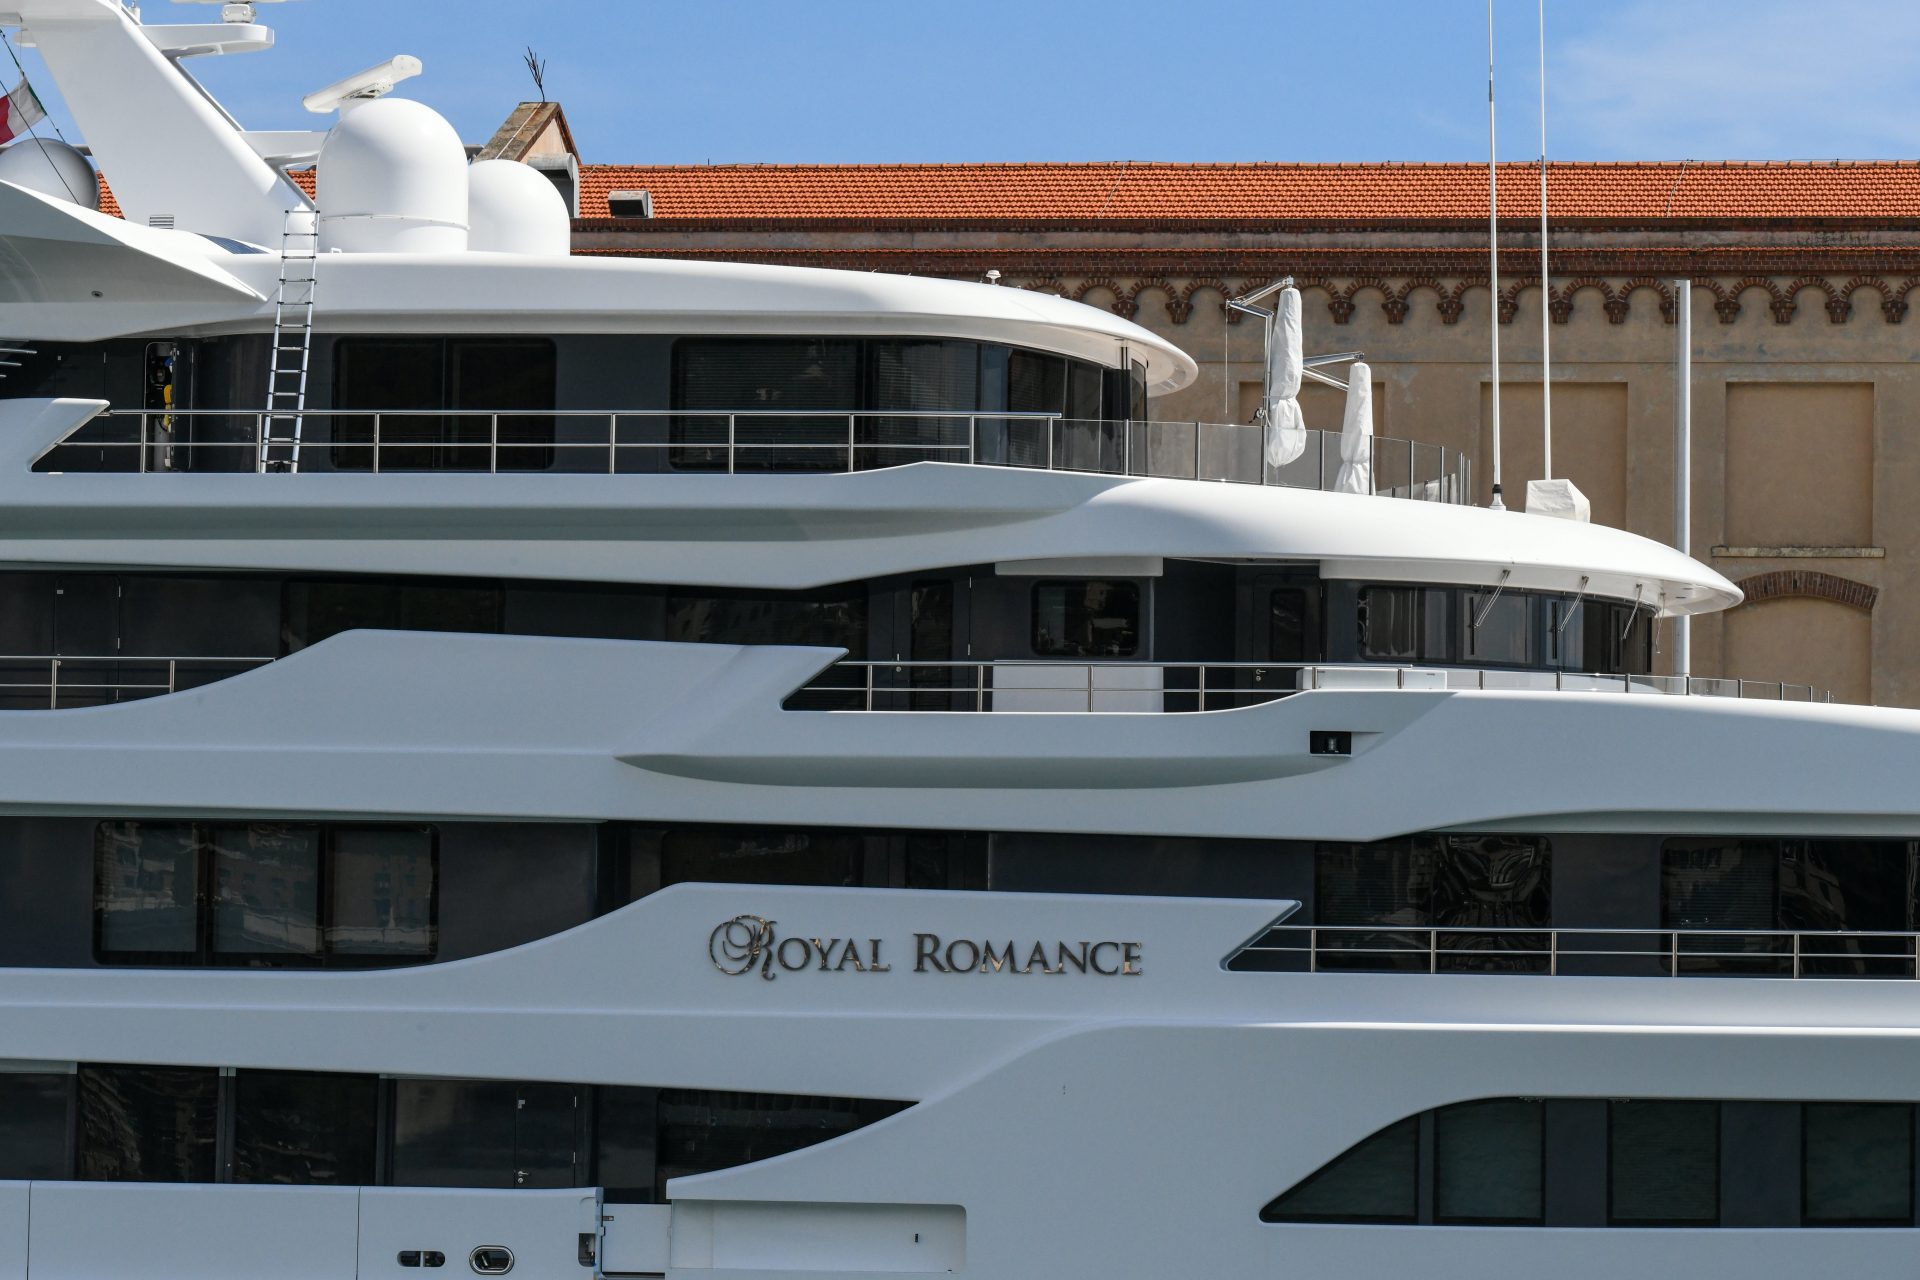 <p><span>The Maritime Executive reported that My Royal Romance was worth $200 million but it is also unclear if the ship will be able to fetch such a steep price at auction. </span></p> <p>Photo Credit: Wiki Commons By Bernhard Holub, Own Work, CC BY-SA 4.0</p>